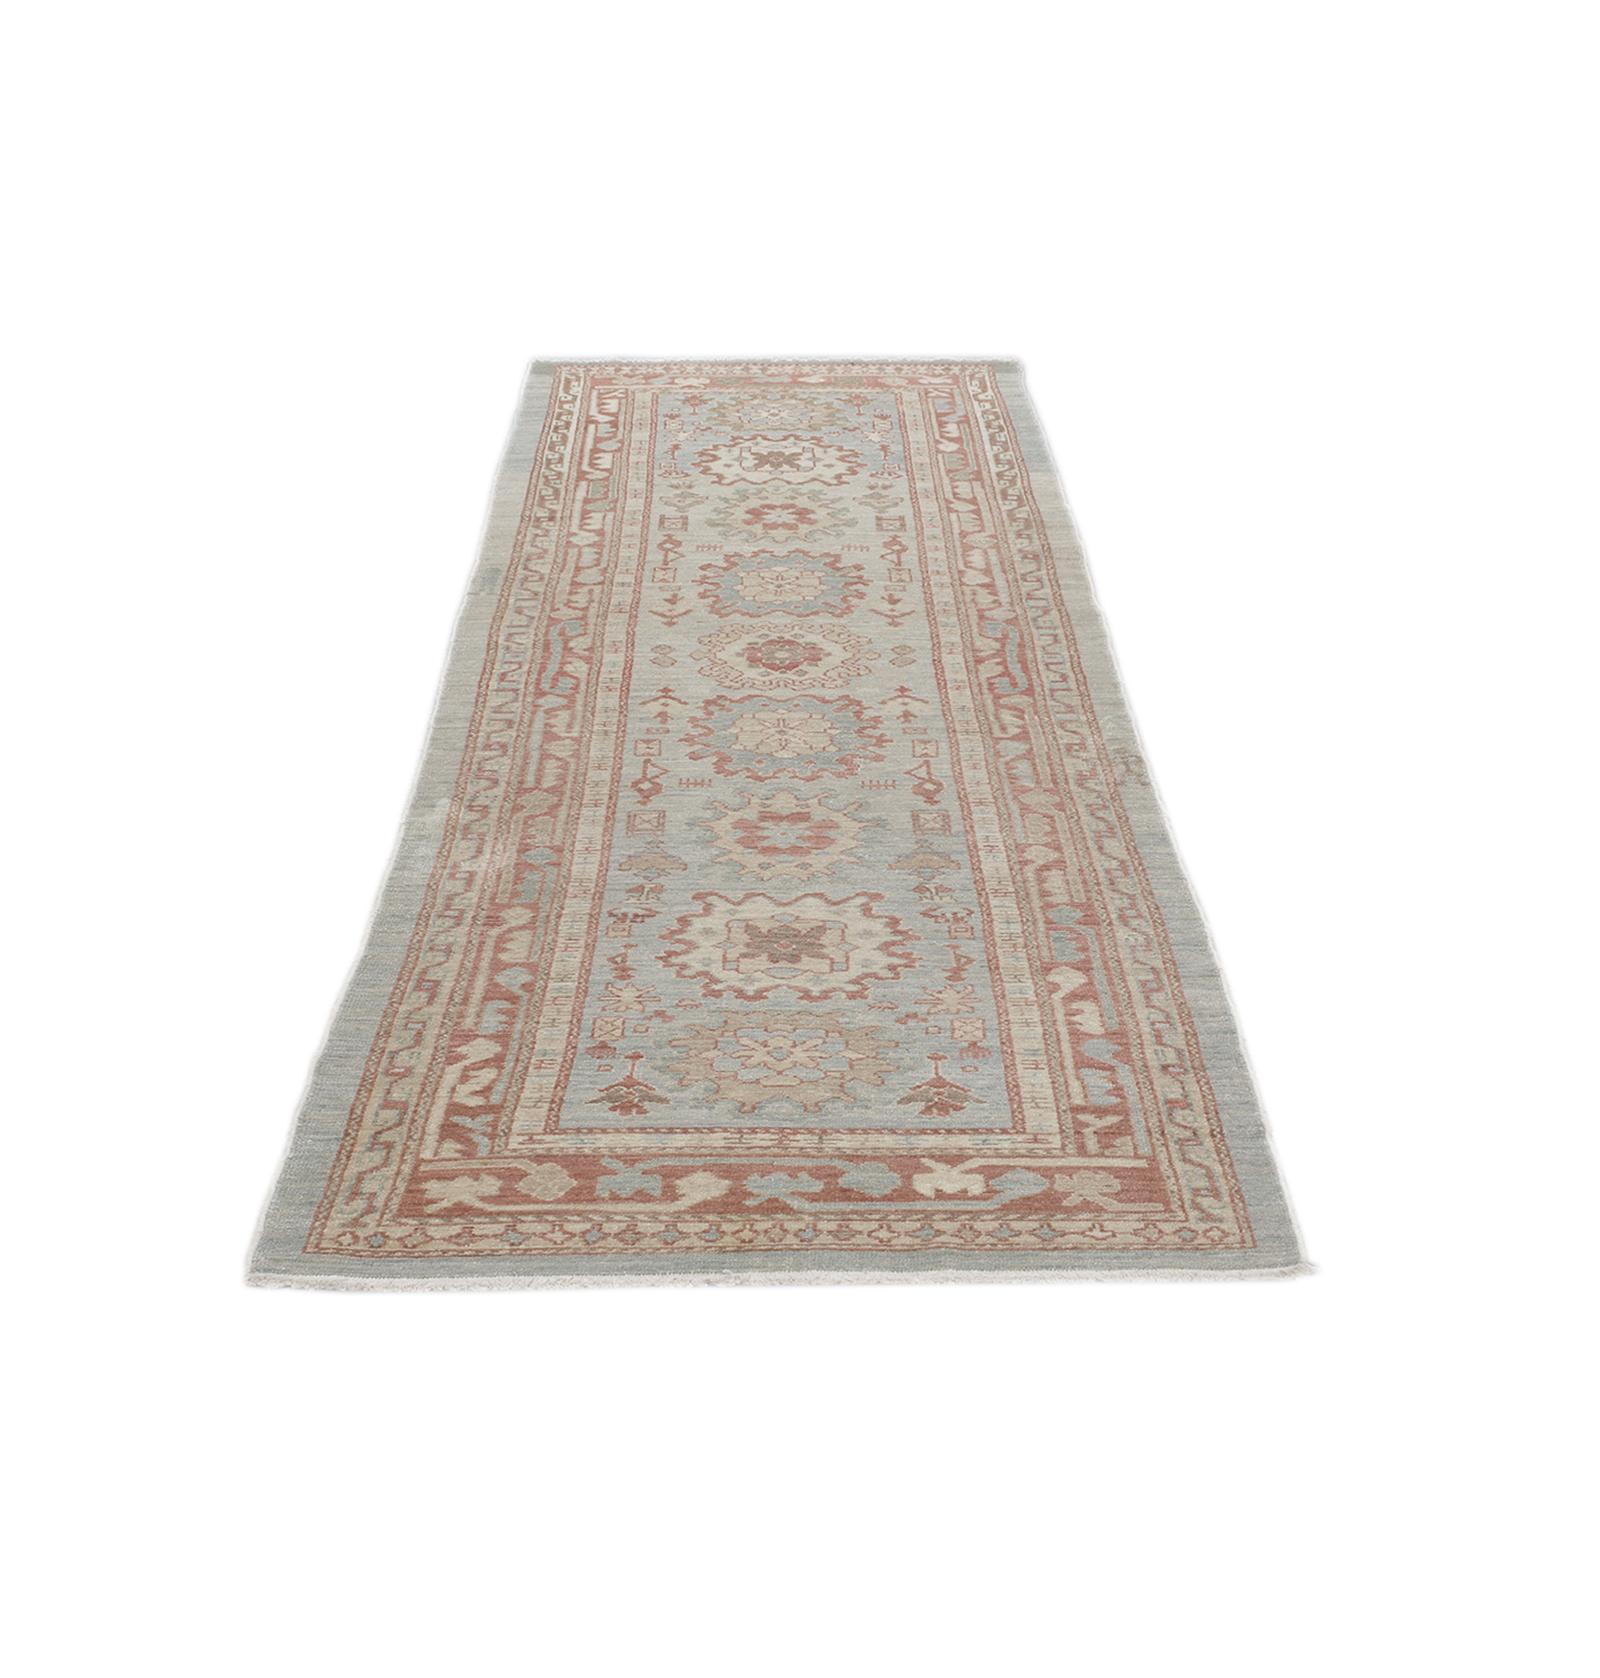 Made in Iran with the highest quality Persian hand-carded, hand-spun wool and vegetable dyes, this rug resembles the antique original pieces crafted by the Kurdish weavers of the north-western area. Custom sizes and colors available. Rug size